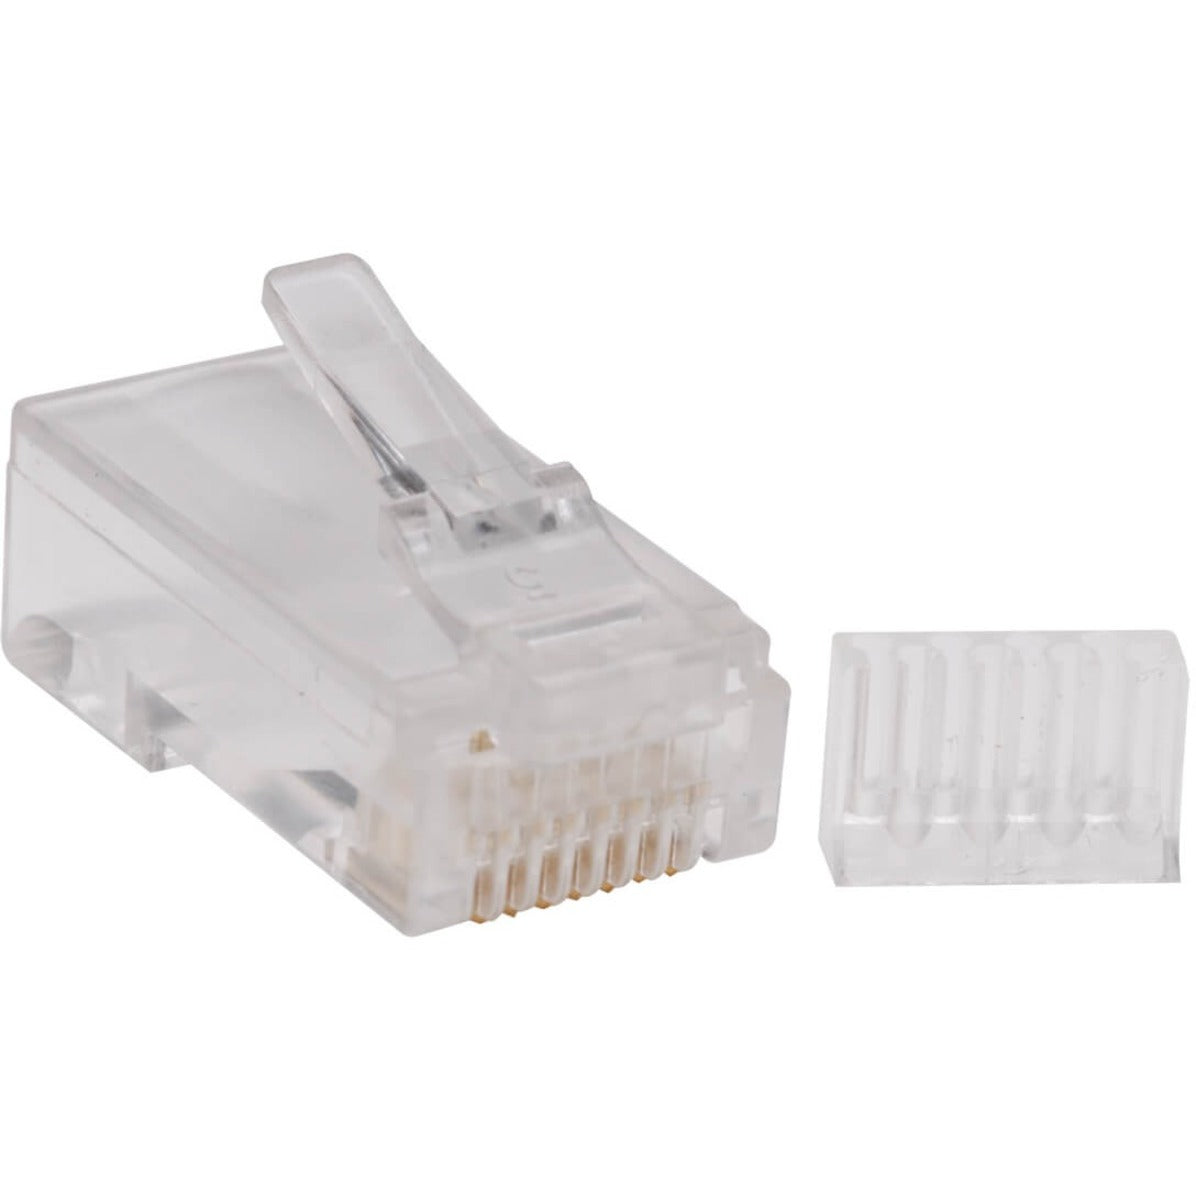 Tripp Lite N230-100 Cat.6 Network Connector, RJ-45 Male, Gold Plated, 100 Pack